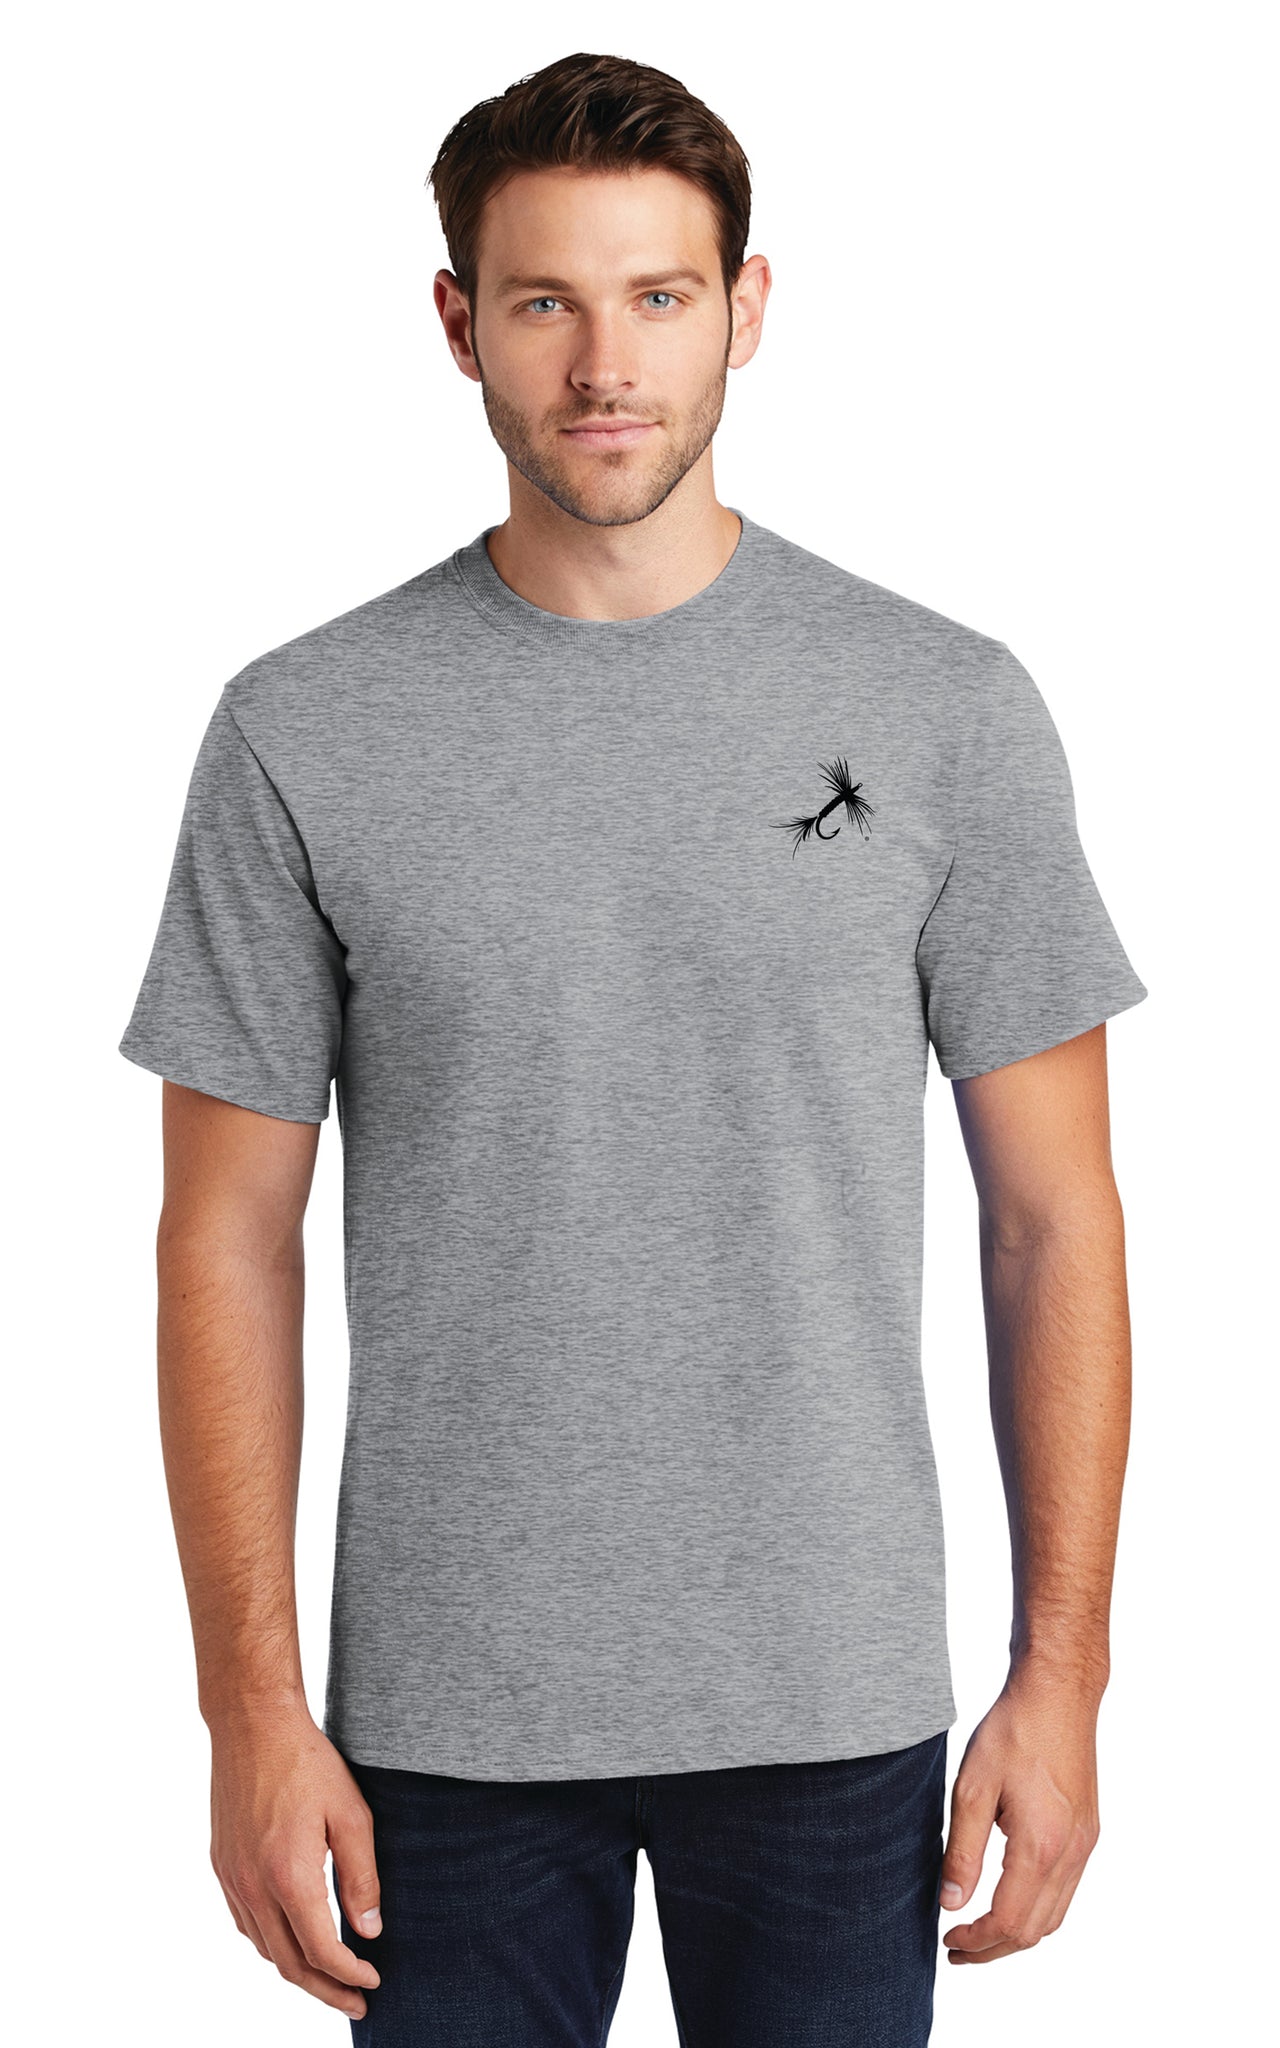 Athletic Heather (grey) T-Shirt - Gifts for Anglers – Reel Threads